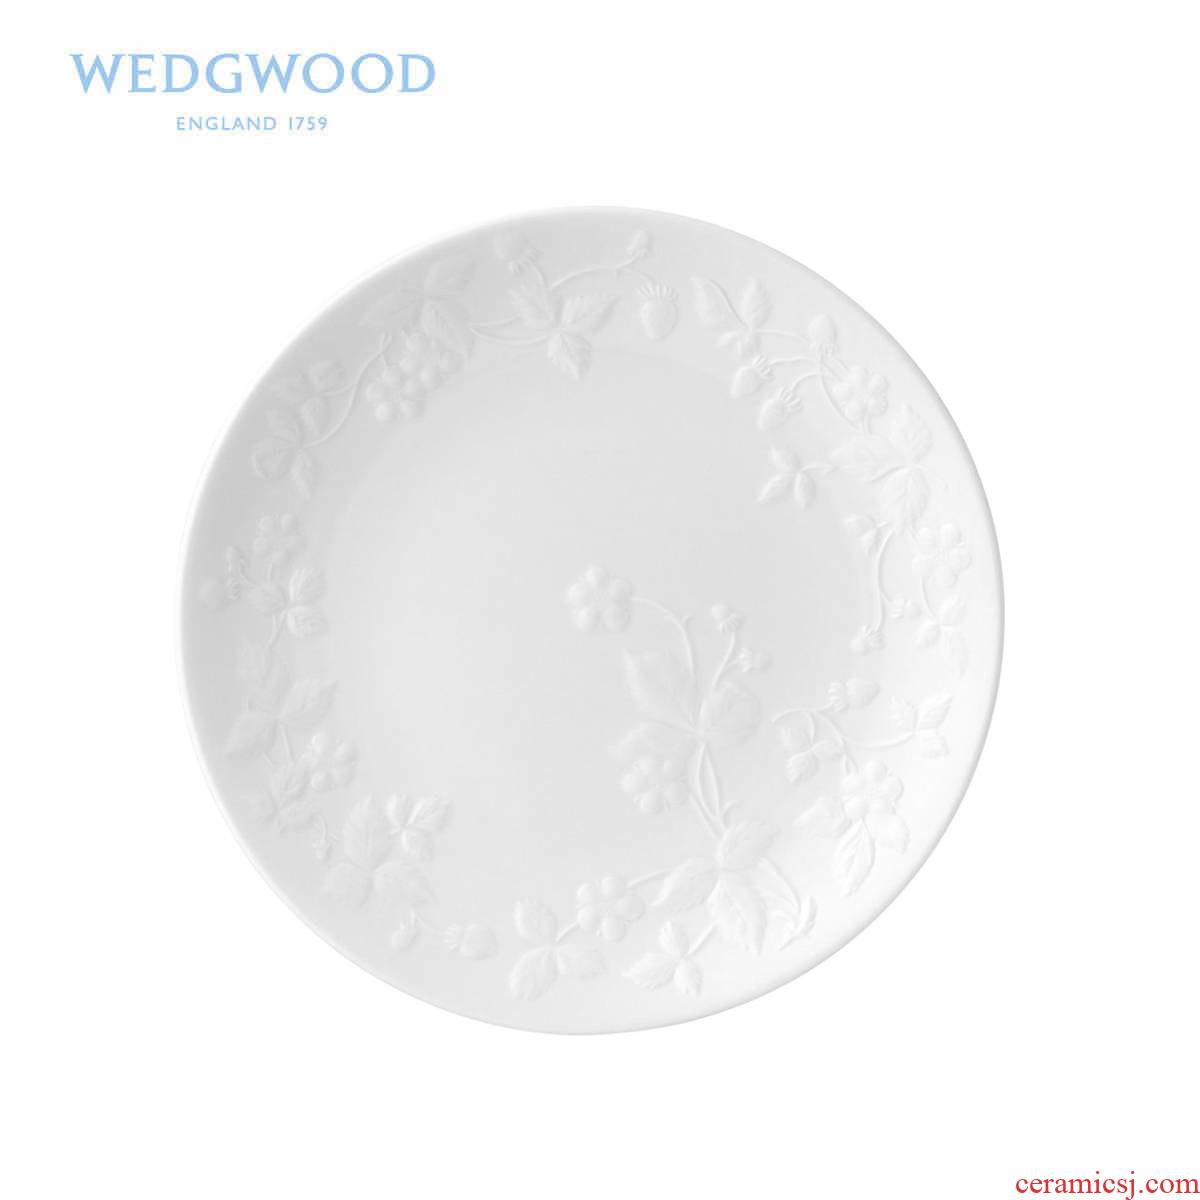 Wedgwood Wild Strawberry White White Strawberry embossment pattern plate 21 cm ipads porcelain plates